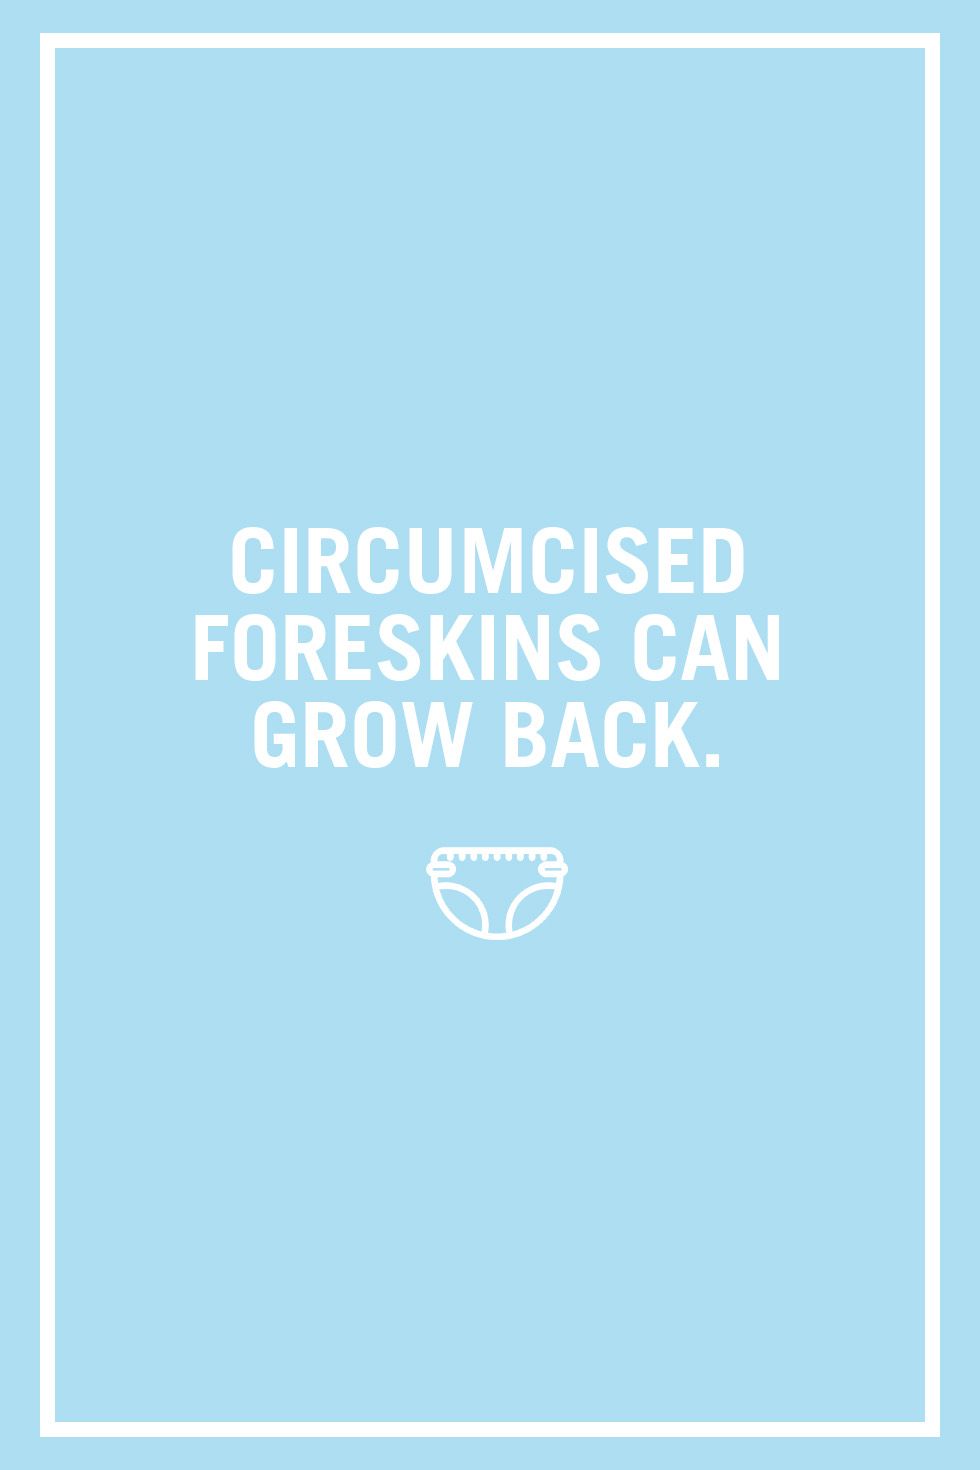 <p>Circumcisions aren't medically necessary, but with <a href="https://www.cdc.gov/nchs/nhds/about_nhds.htm" data-tracking-id="recirc-text-link" target="_blank">58 percent of baby boys in the U.S. getting the snip-snip</a>, they are quite common. If you opt to get your boy's foreskin removed, the doctor will likely tell you to keep it clean and covered. But your job is not done there, as the foreskin can <a href="http://www.cirp.org/library/complications/gracely1/" data-tracking-id="recirc-text-link" target="_blank">reattach somewhat to the head of the penis</a>. This means as his mom, you have to check it regularly and pull it back or else he may have to have the surgery repeated. Now there's a fun mommy-son bonding moment!<span class="redactor-invisible-space"></span></p>